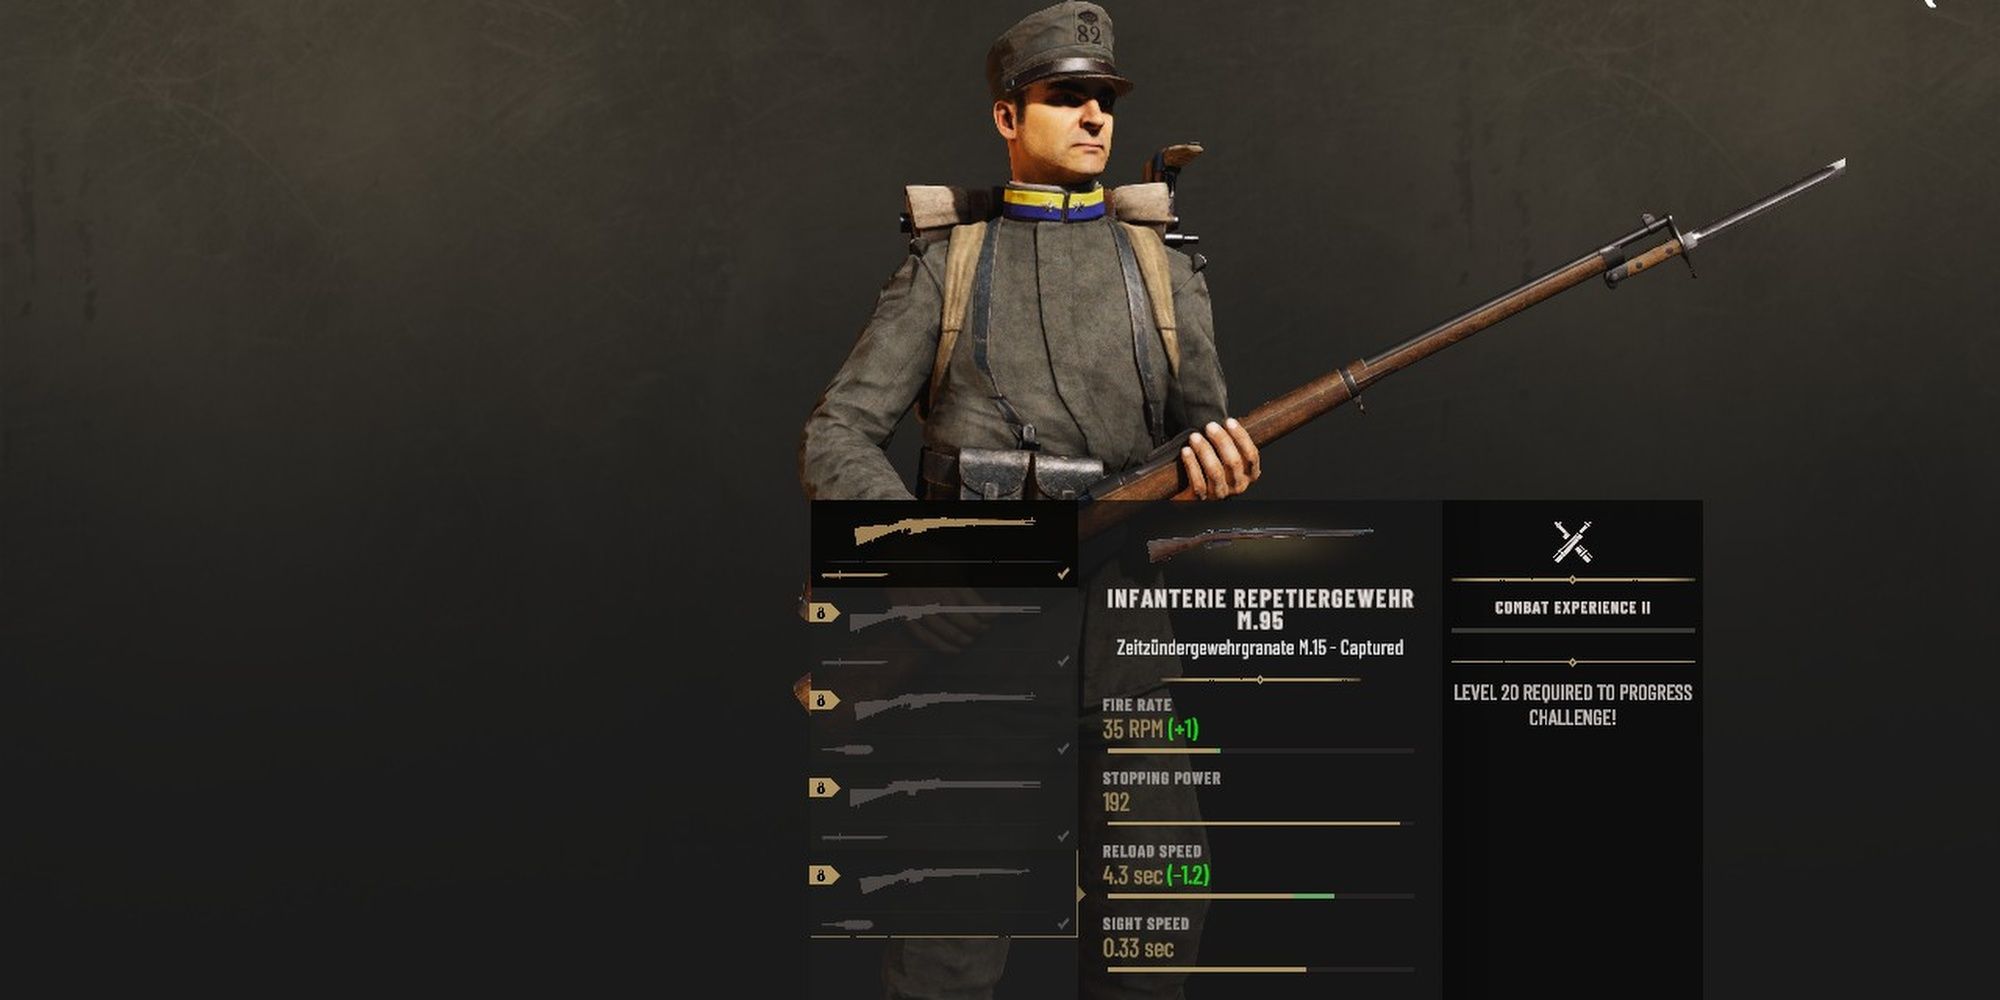 Isonzo: Unlock Requirements For Particular Weapons